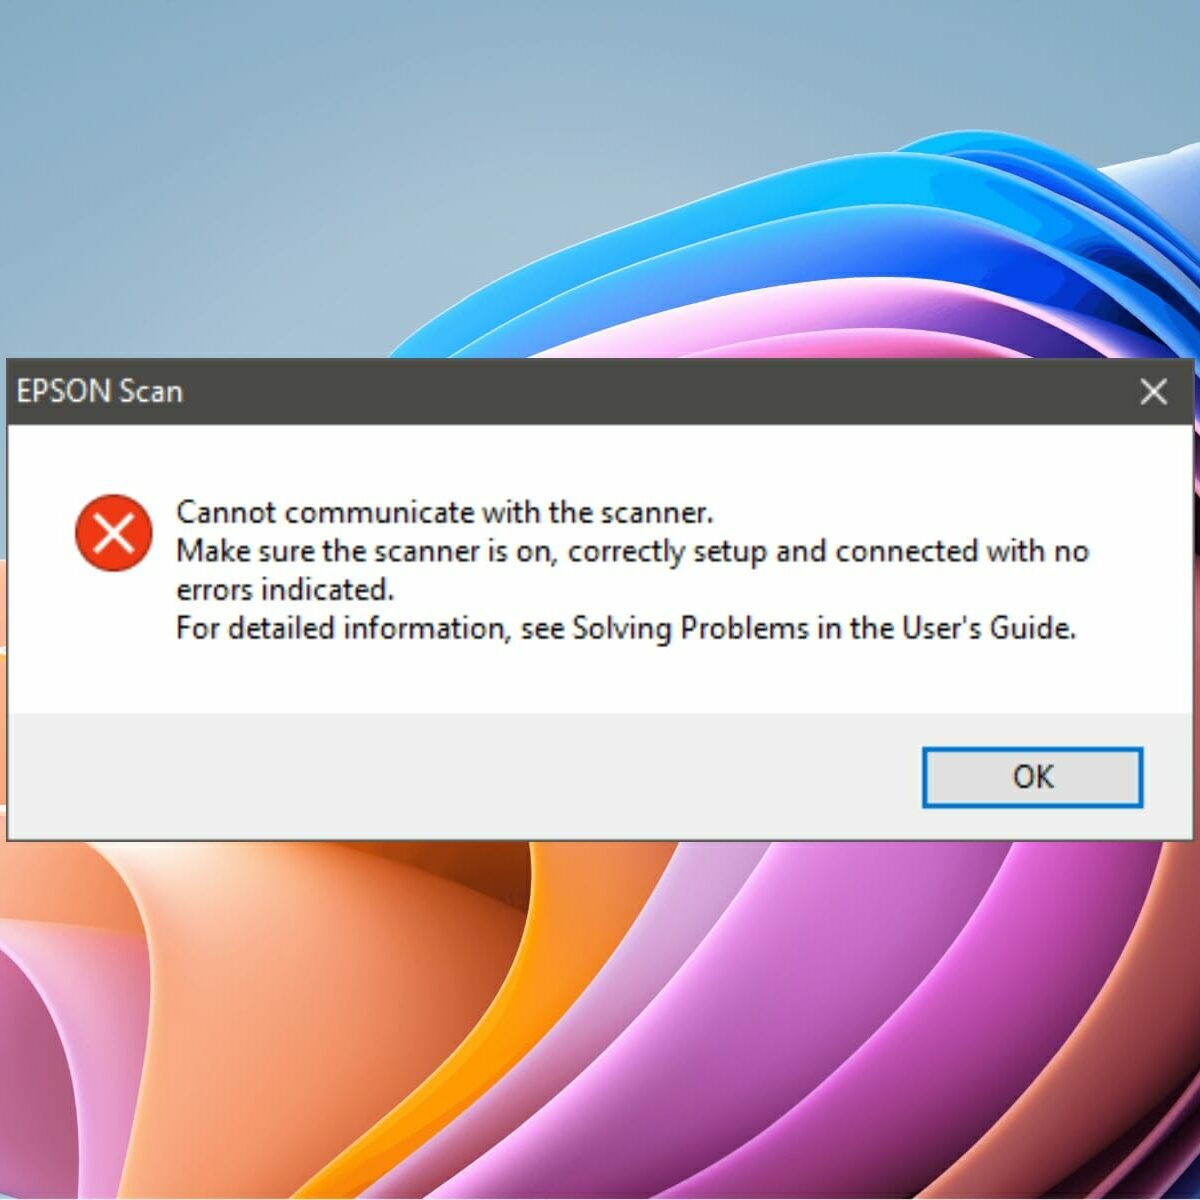 Vælg forord tyv How to fix Epson scan not working on Windows 11?